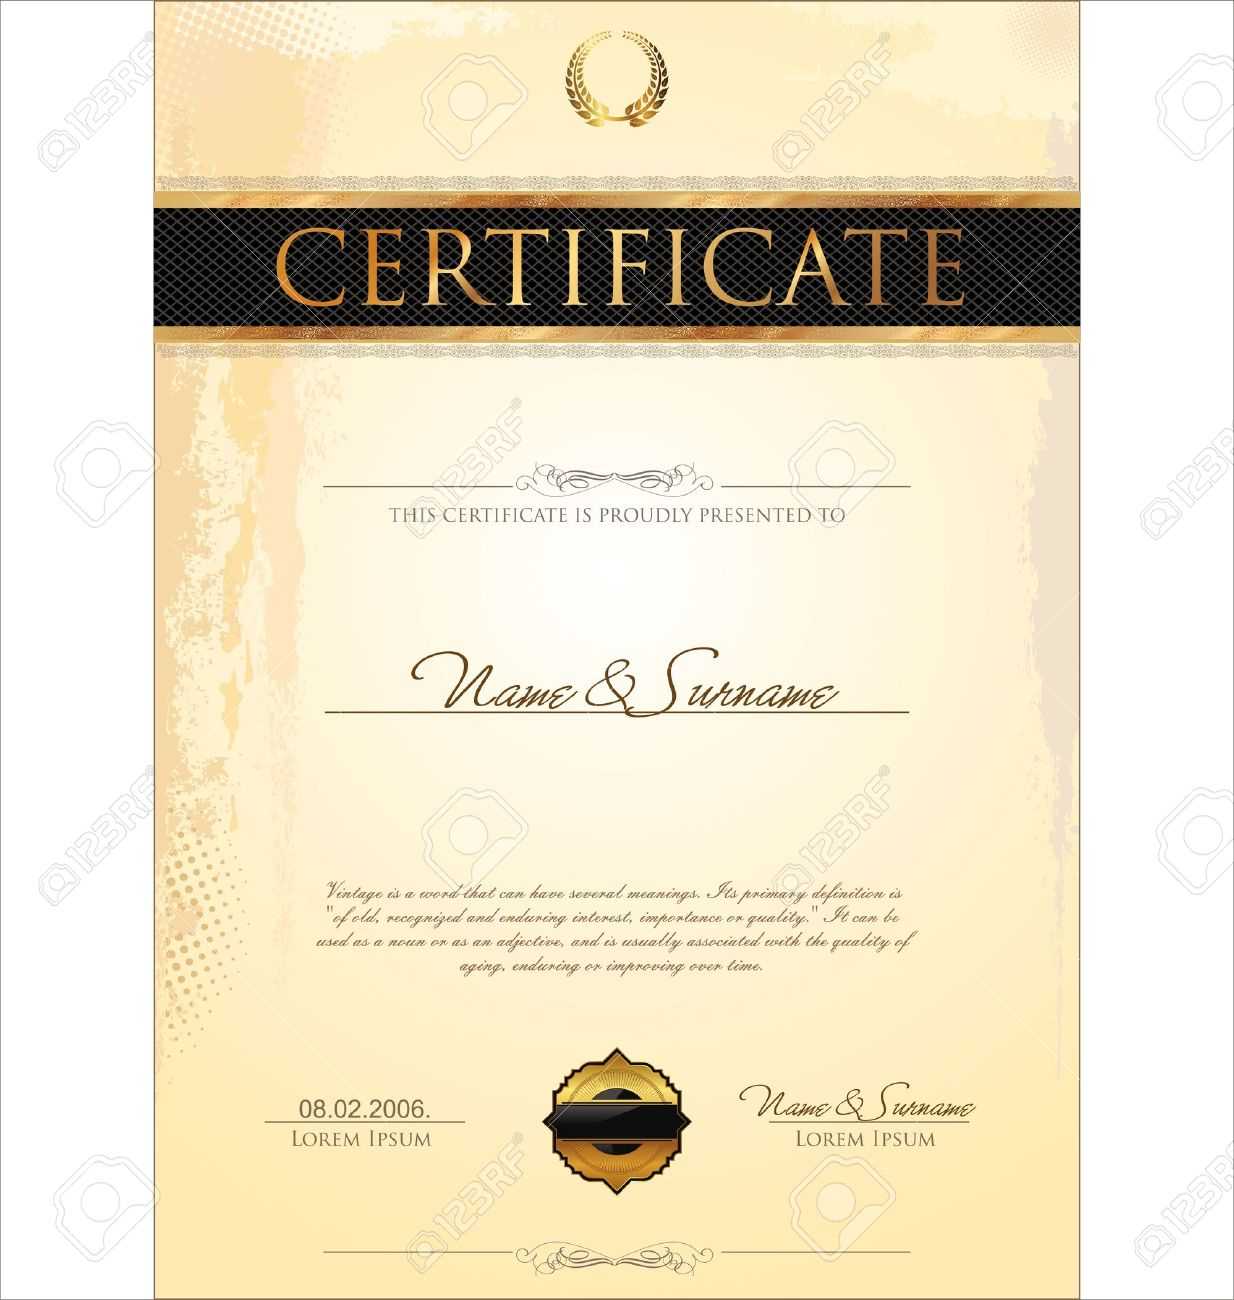 Certificate Template Throughout Stock Certificate Template Word